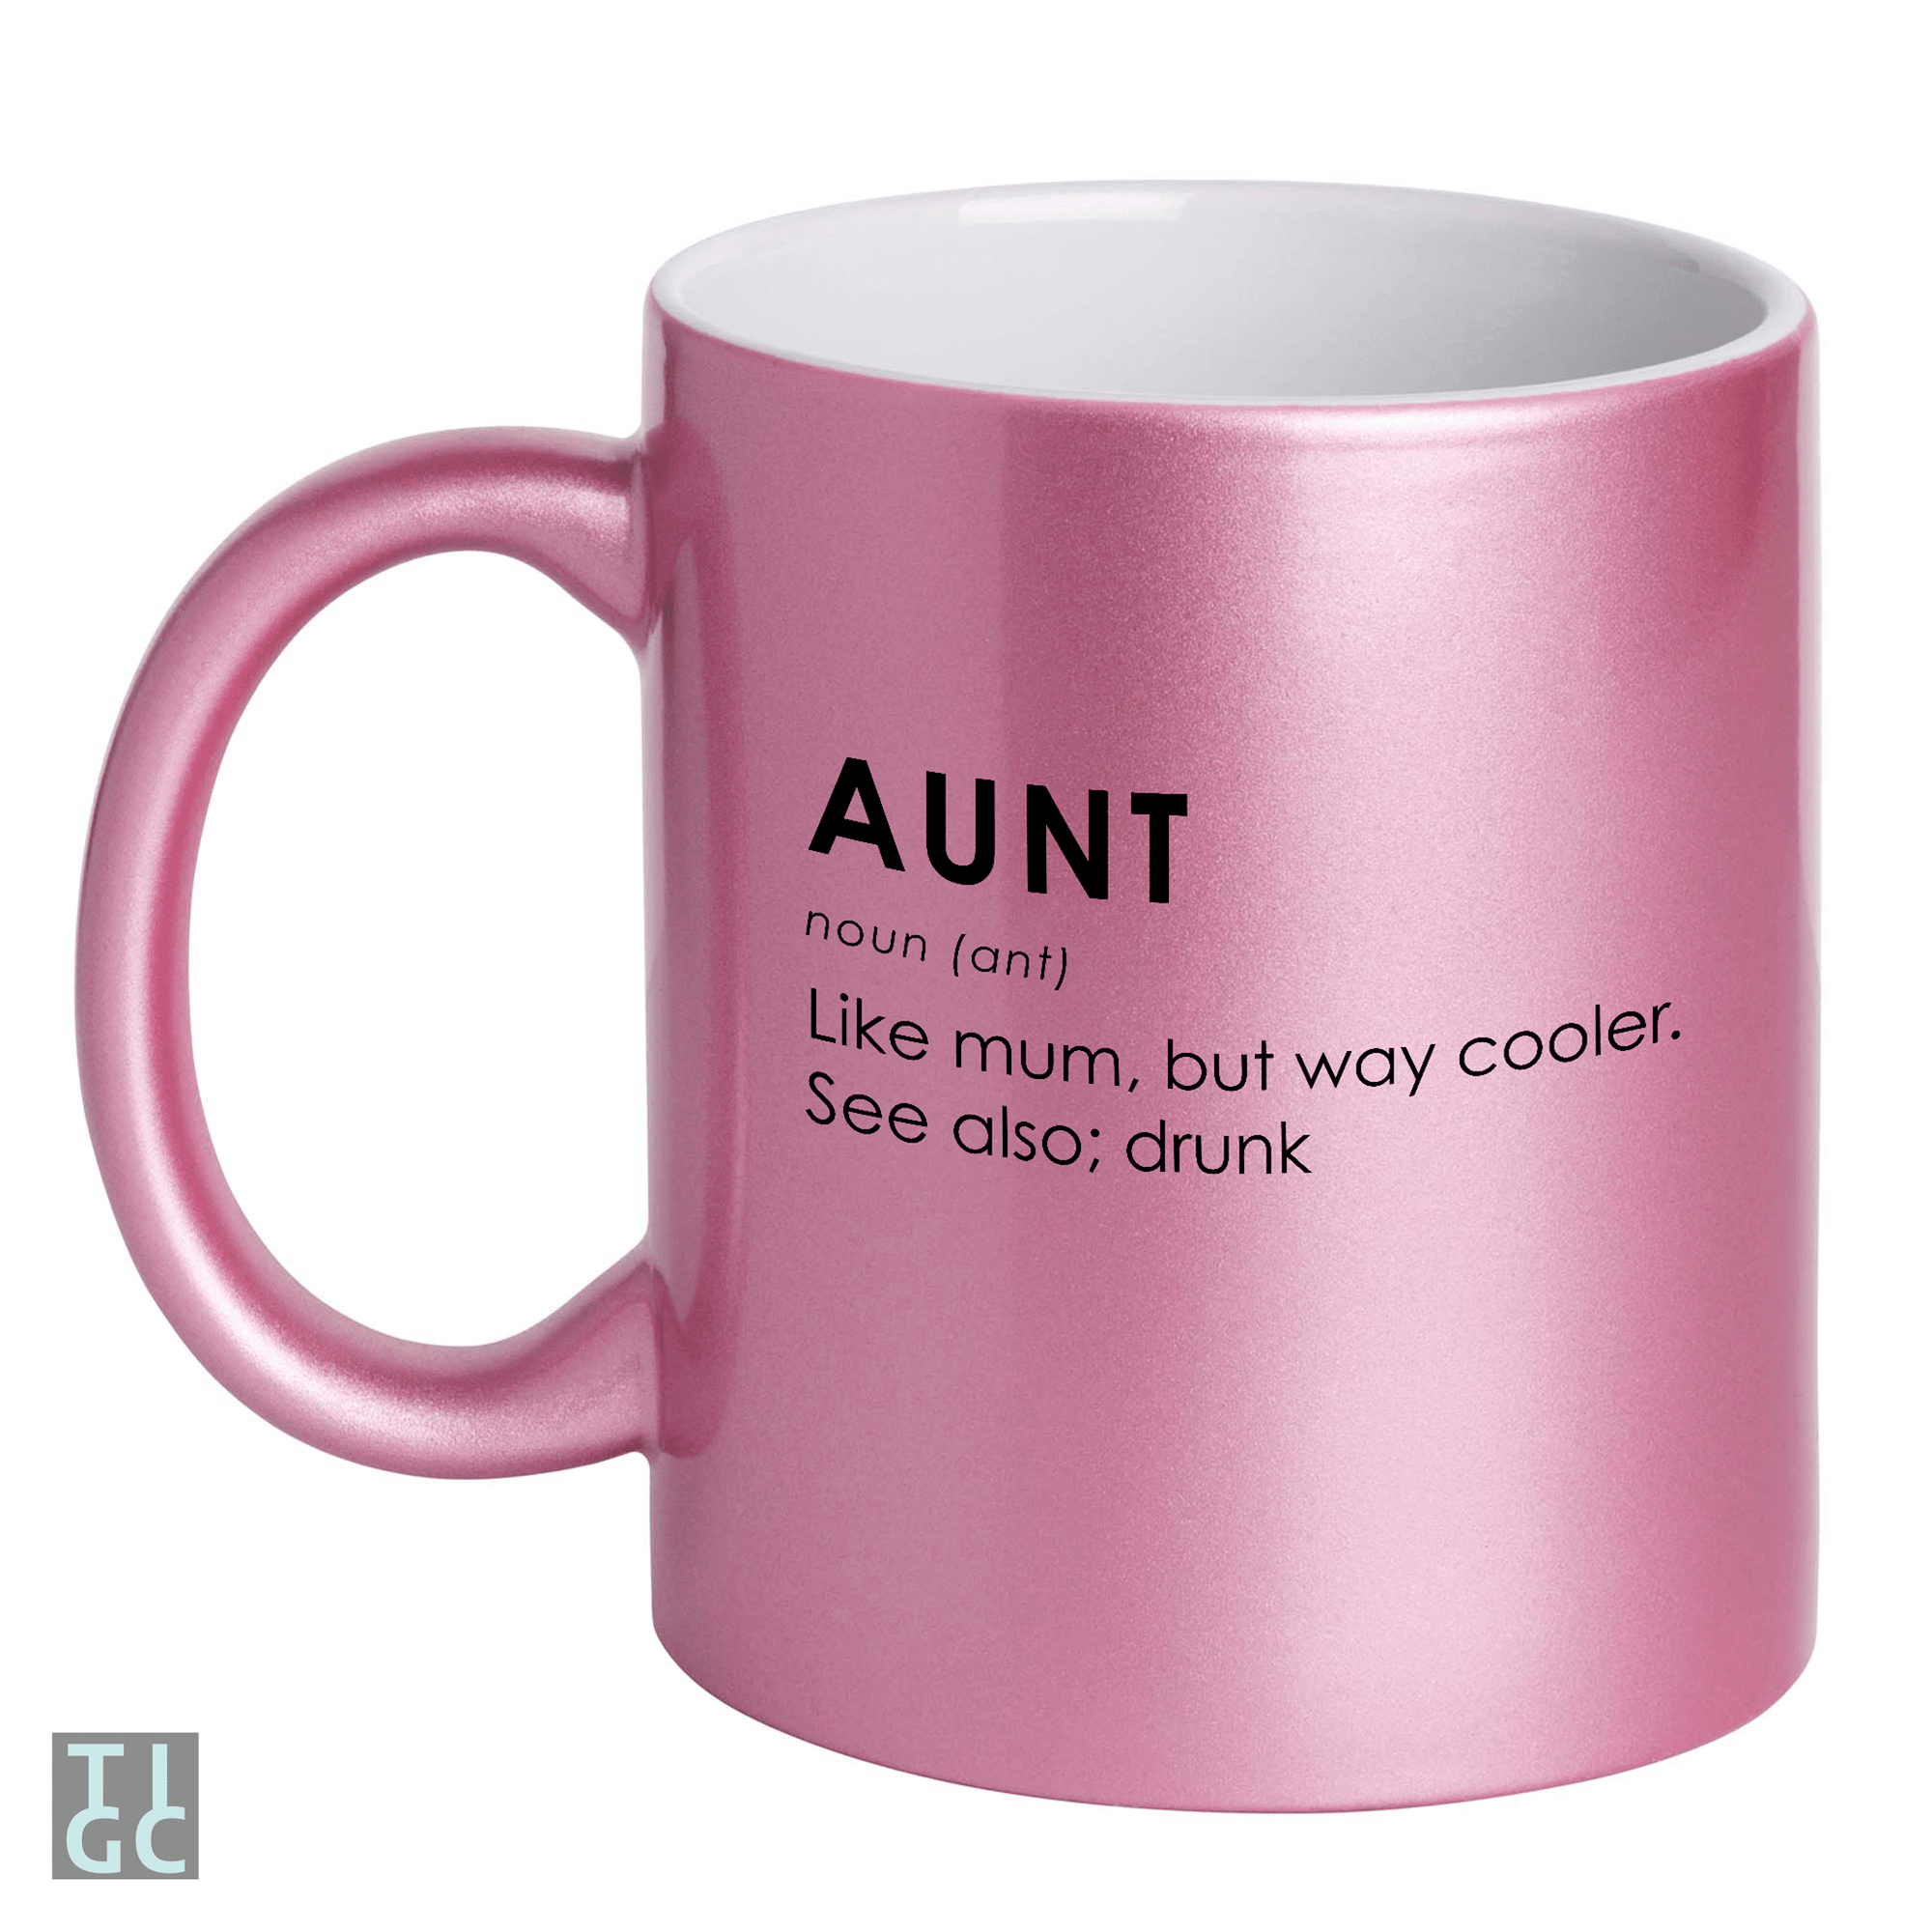 TIGC The Inappropriate Gift Co Aunt mug